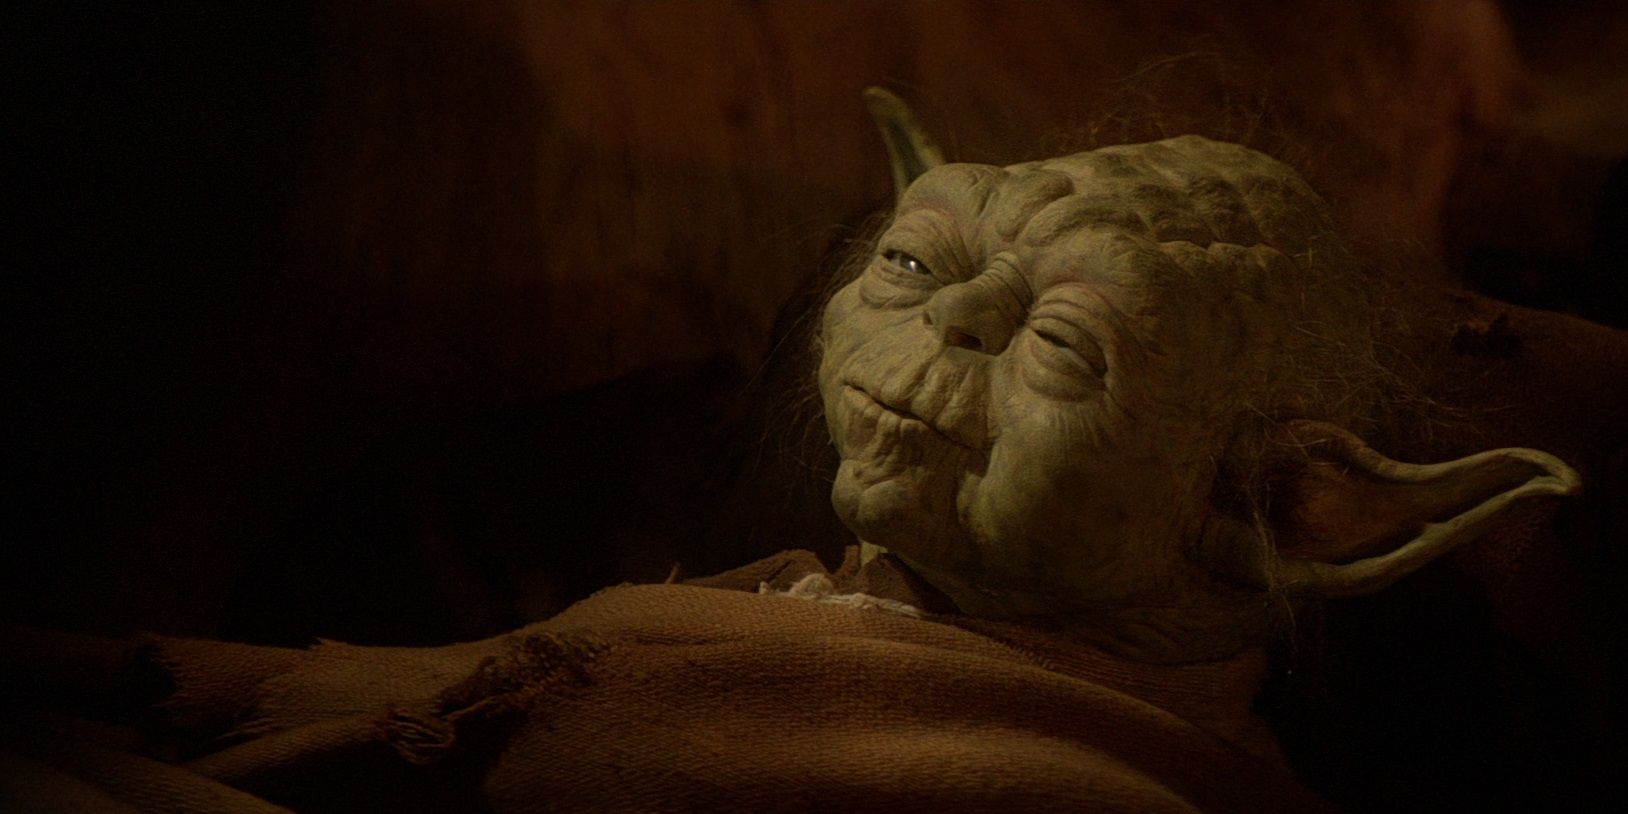 Yoda on his death bed in Star Wars Return of the Jedi